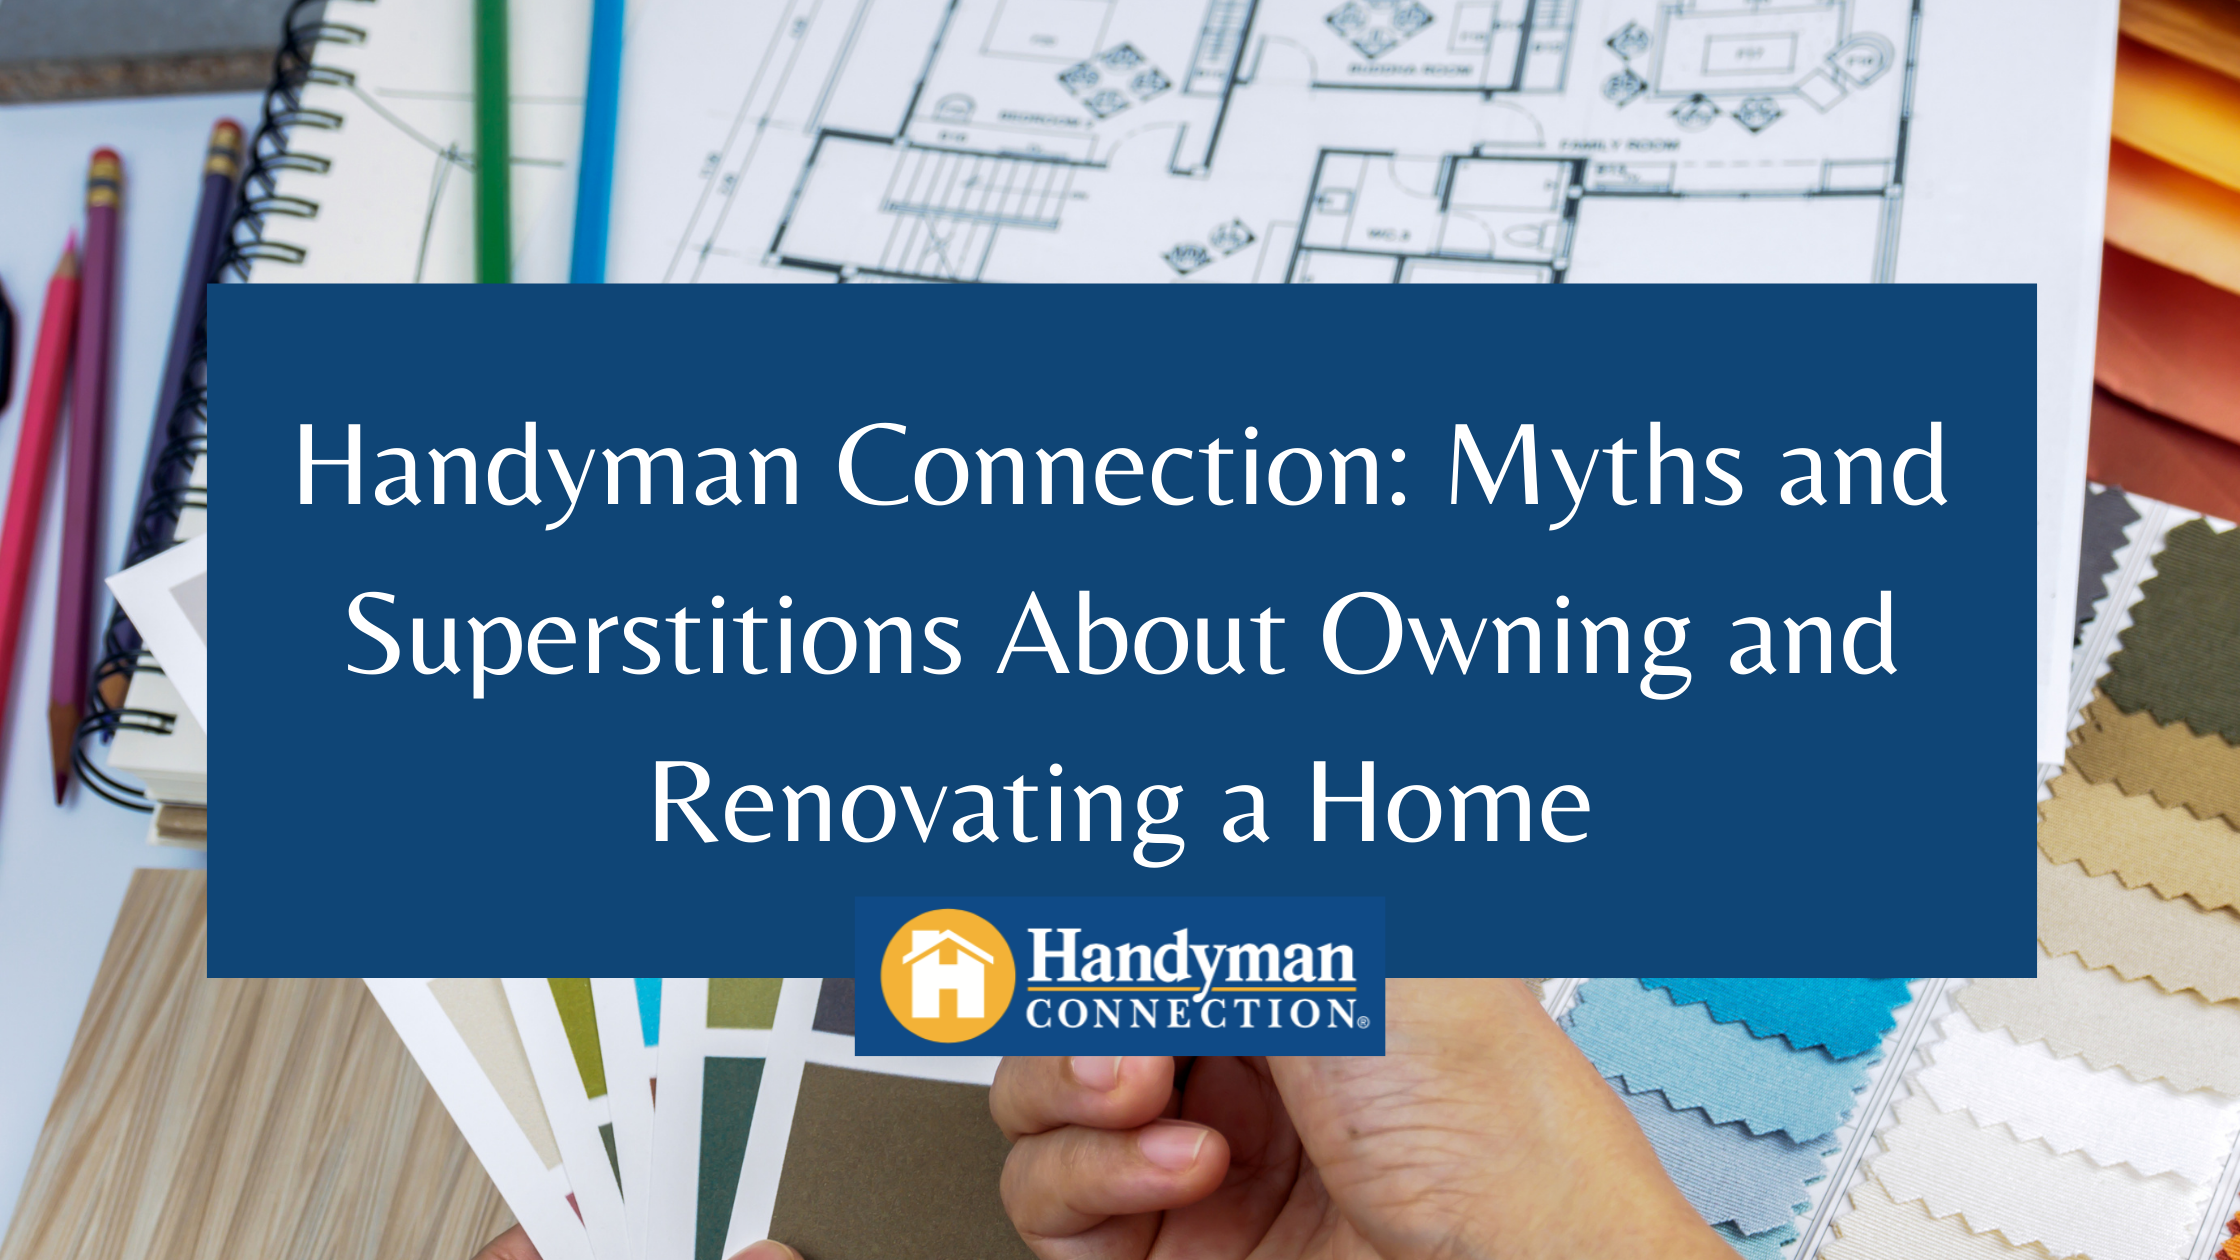 https://handymanconnection.com/wp-content/uploads/2021/05/Handyman-Connection_-Myths-and-Superstitions-About-Owning-and-Renovating-a-Home-1.png